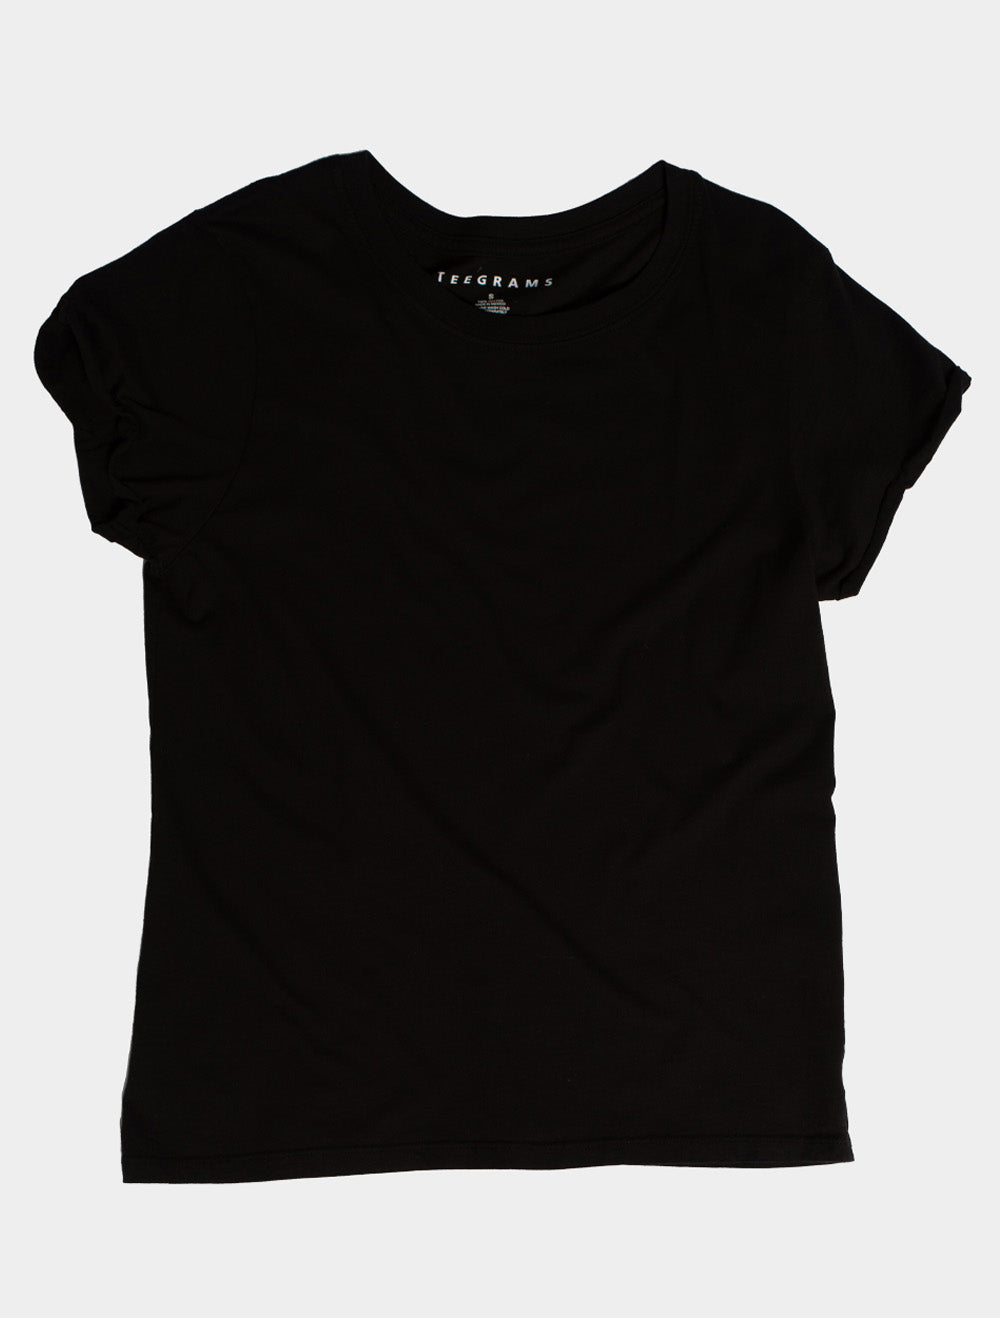 Black Fitted Tee